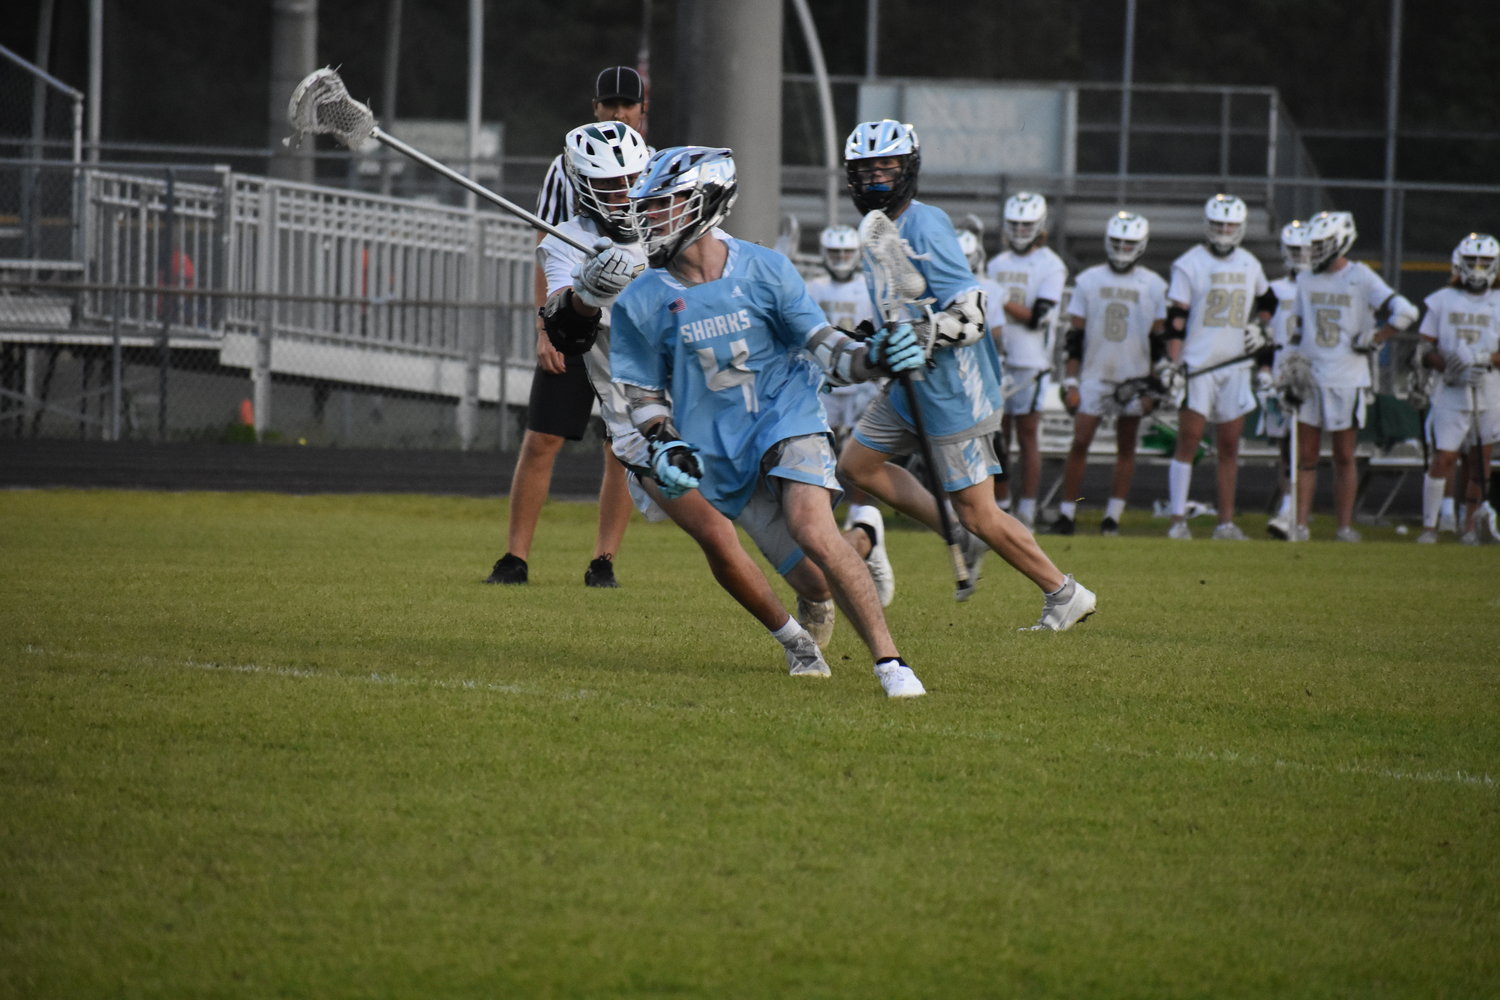 Corey Bloss and the Sharks will face the Winter Park Wildcats in the state semifinals May 5 in Naples.